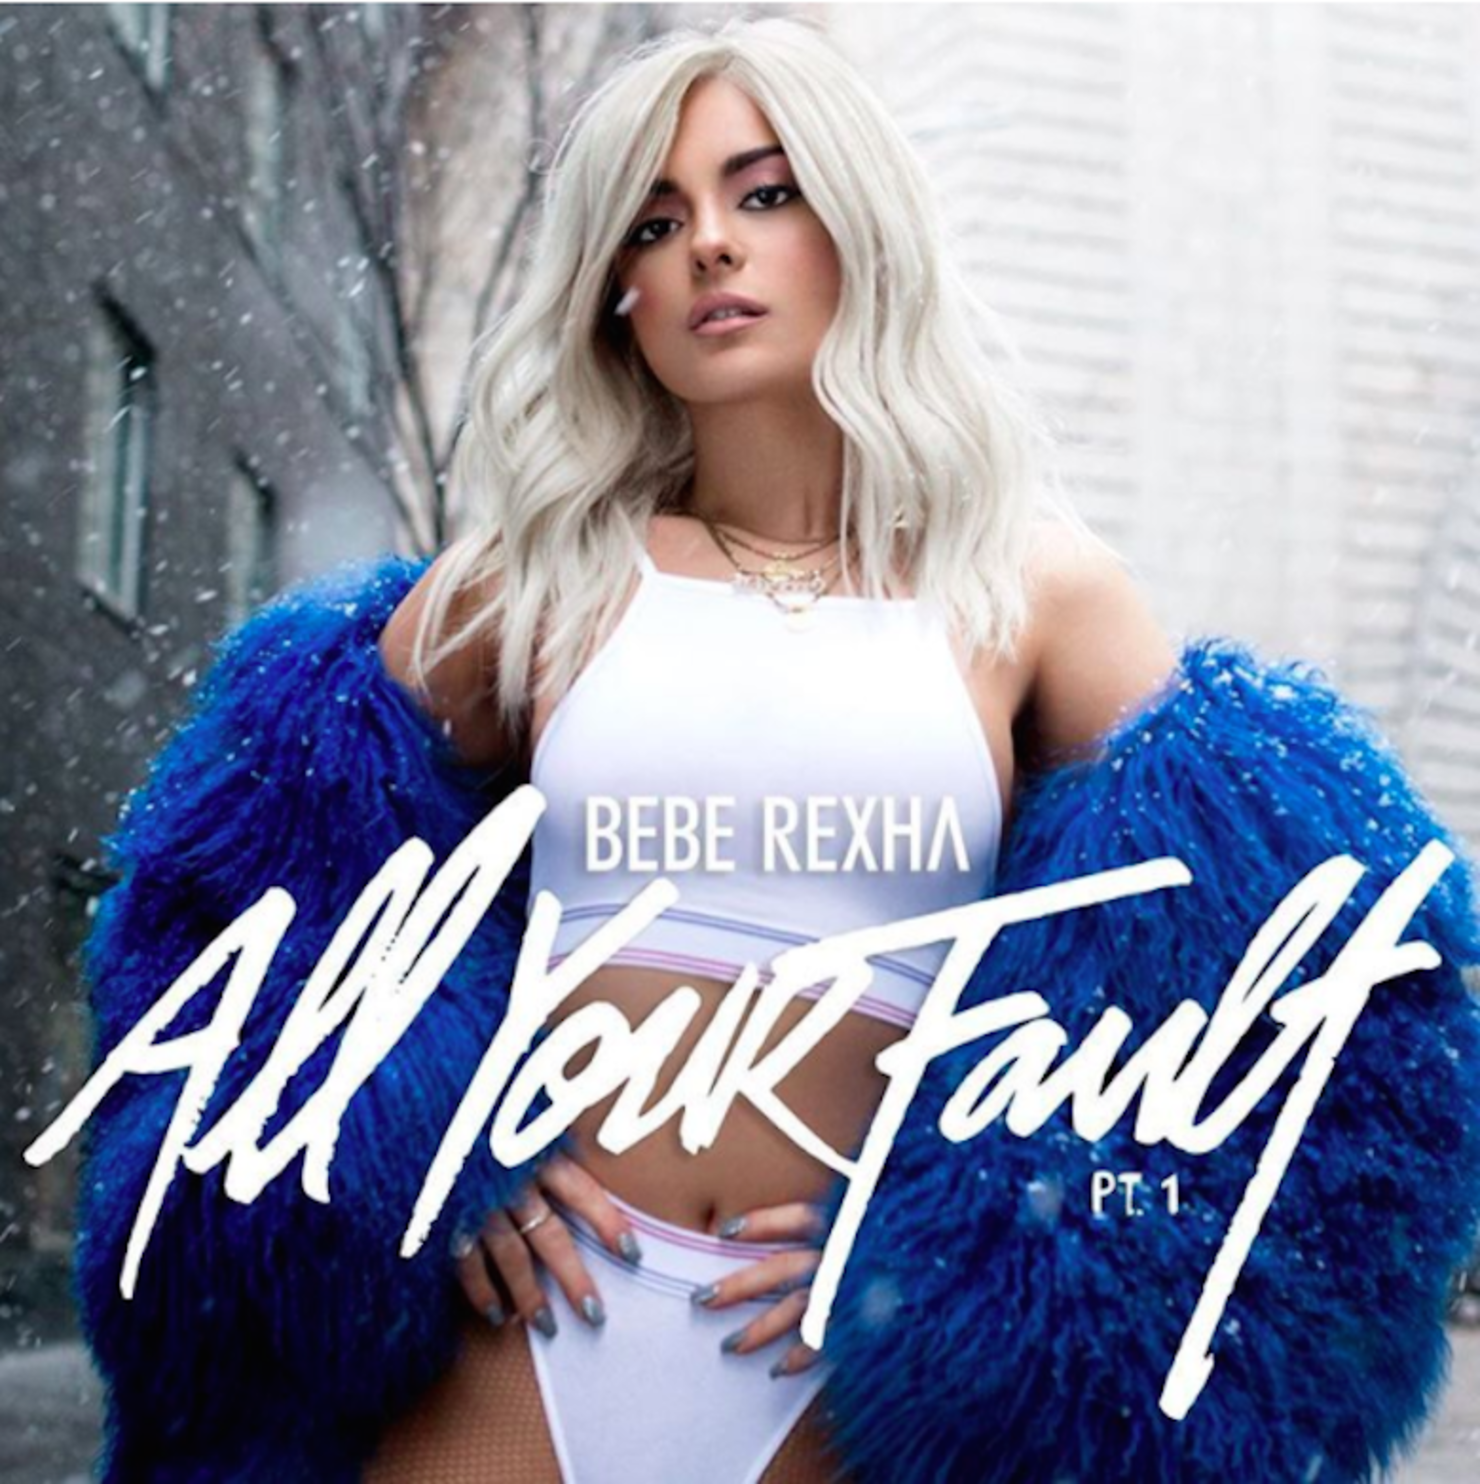 Bebe Rexha - 'All Your Fault Pt 1' Cover Art